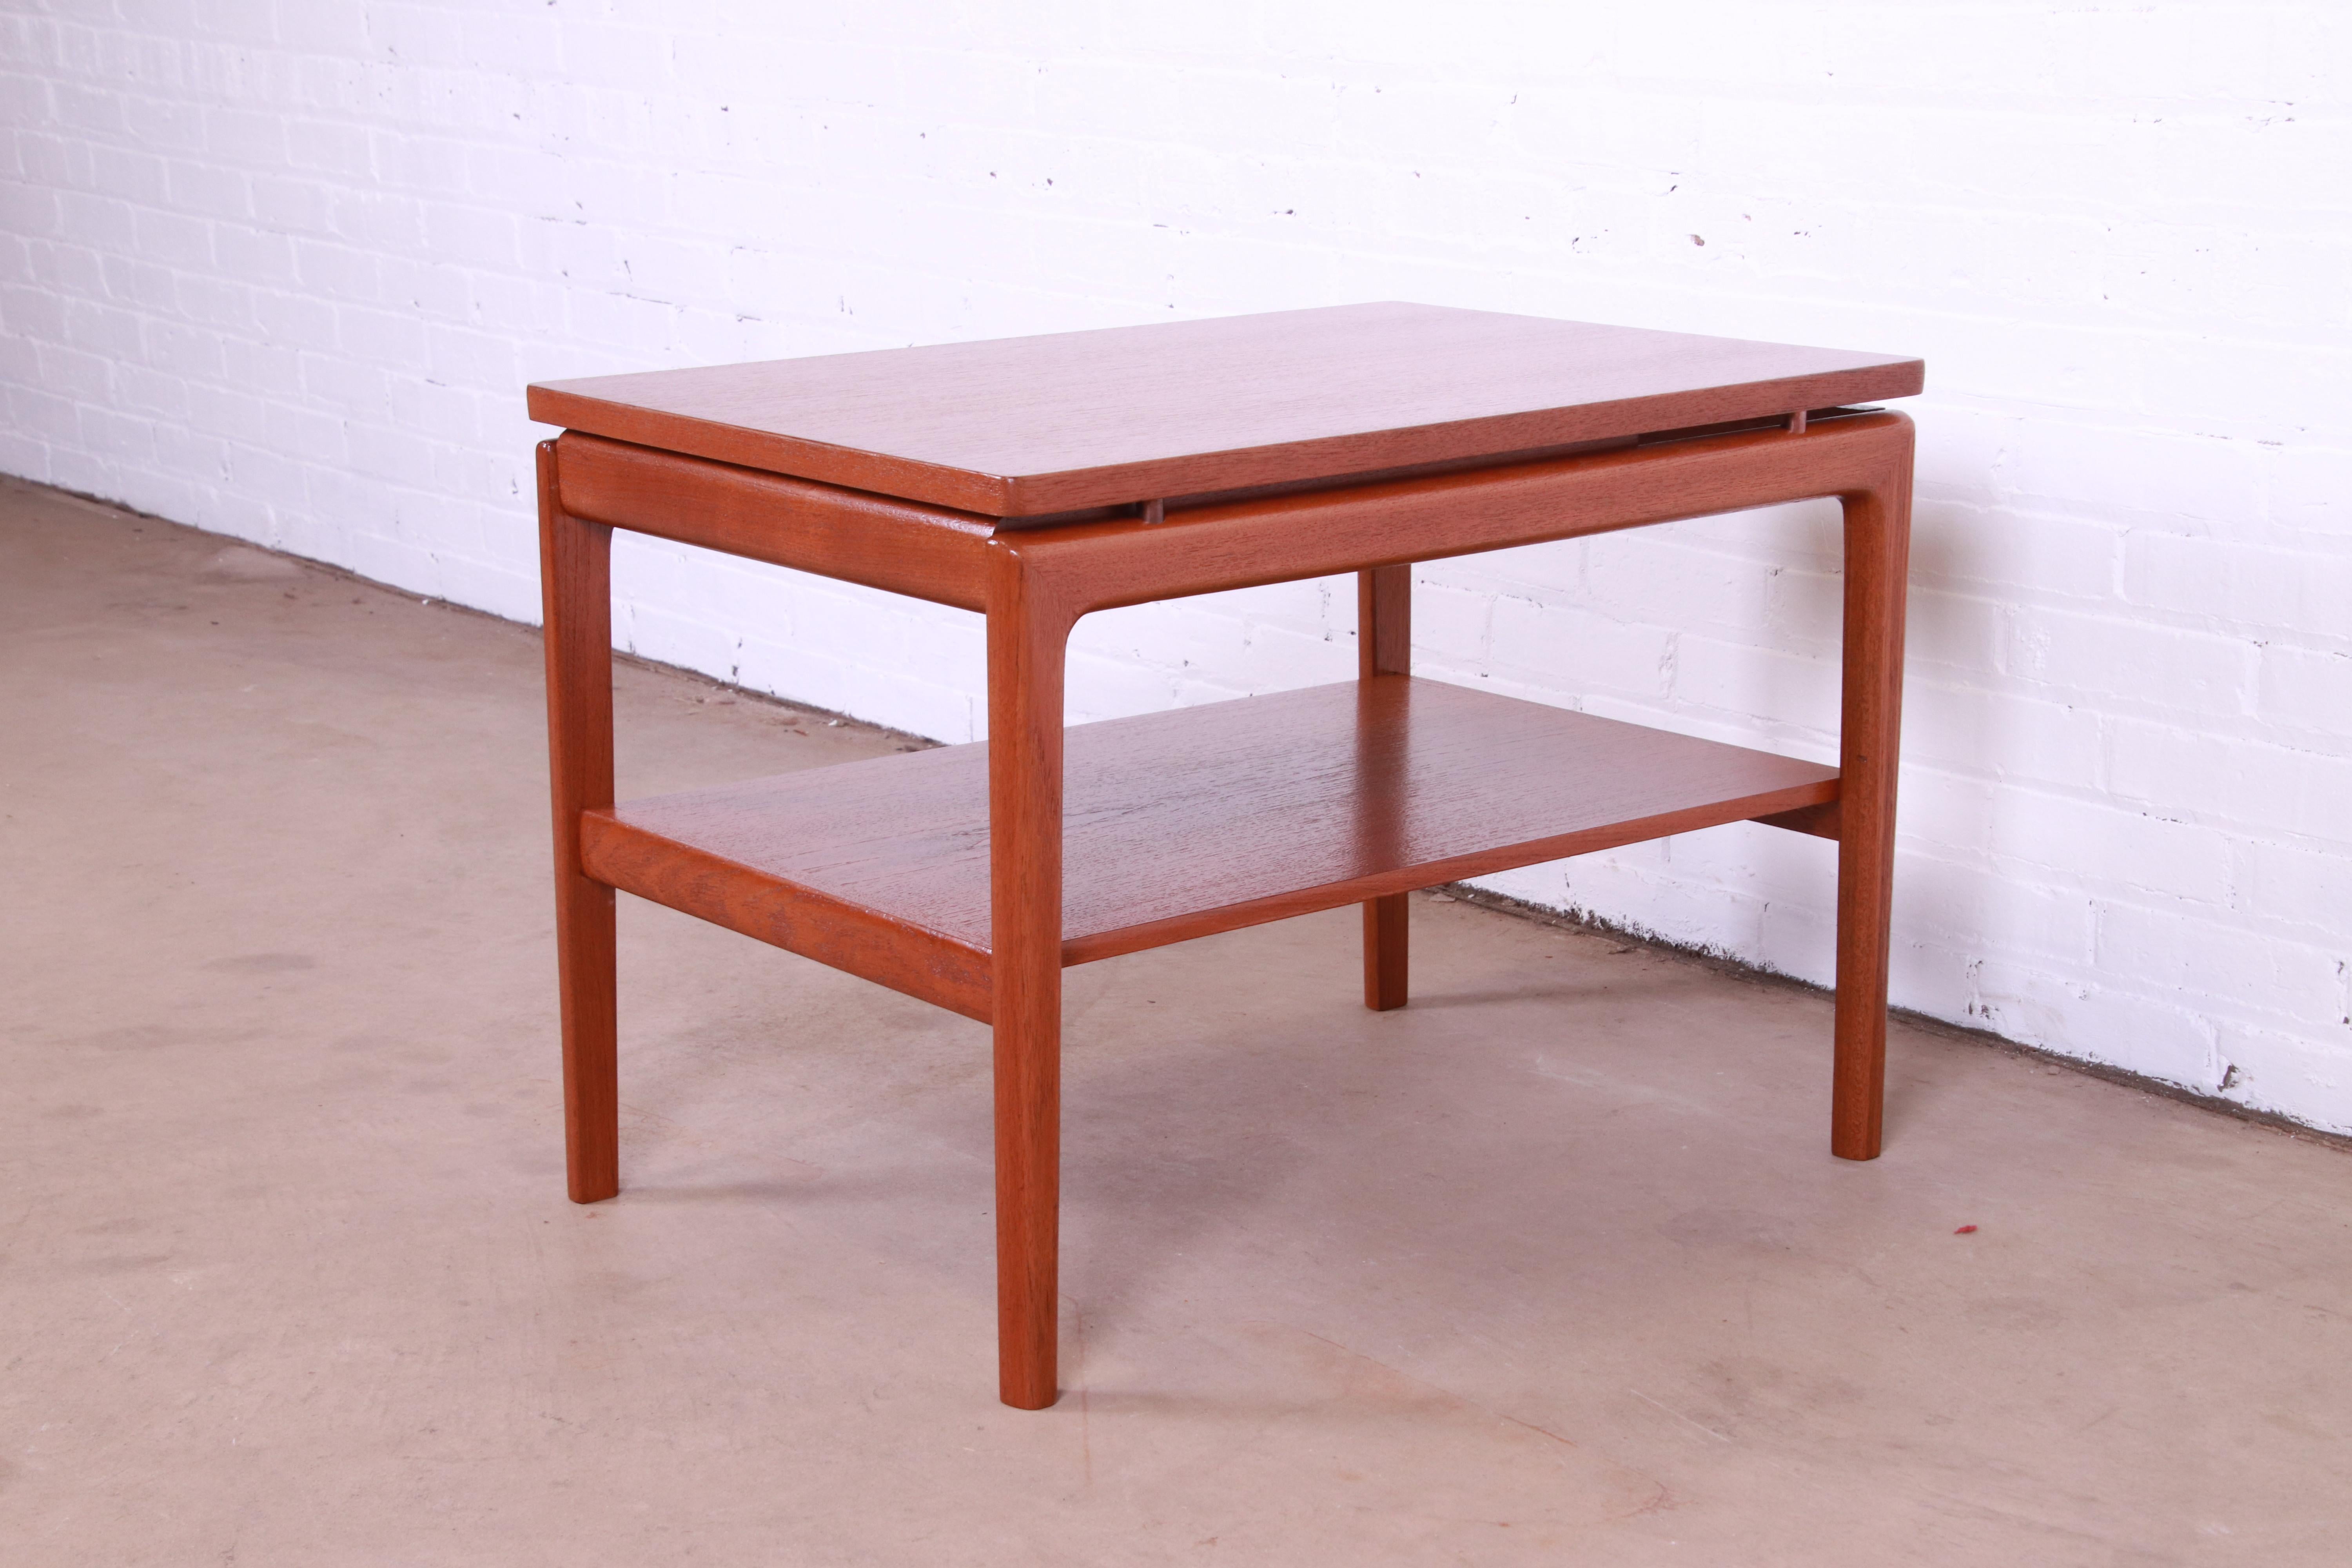 A sleek and stylish mid-century Danish Modern two-tier occasional side table with single drawer

Attributed to Peter Hvidt and Orla Mølgaard-Nielsen

Denmark, 1950s

Sculpted teak, with brass accents.

Measures: 20.5